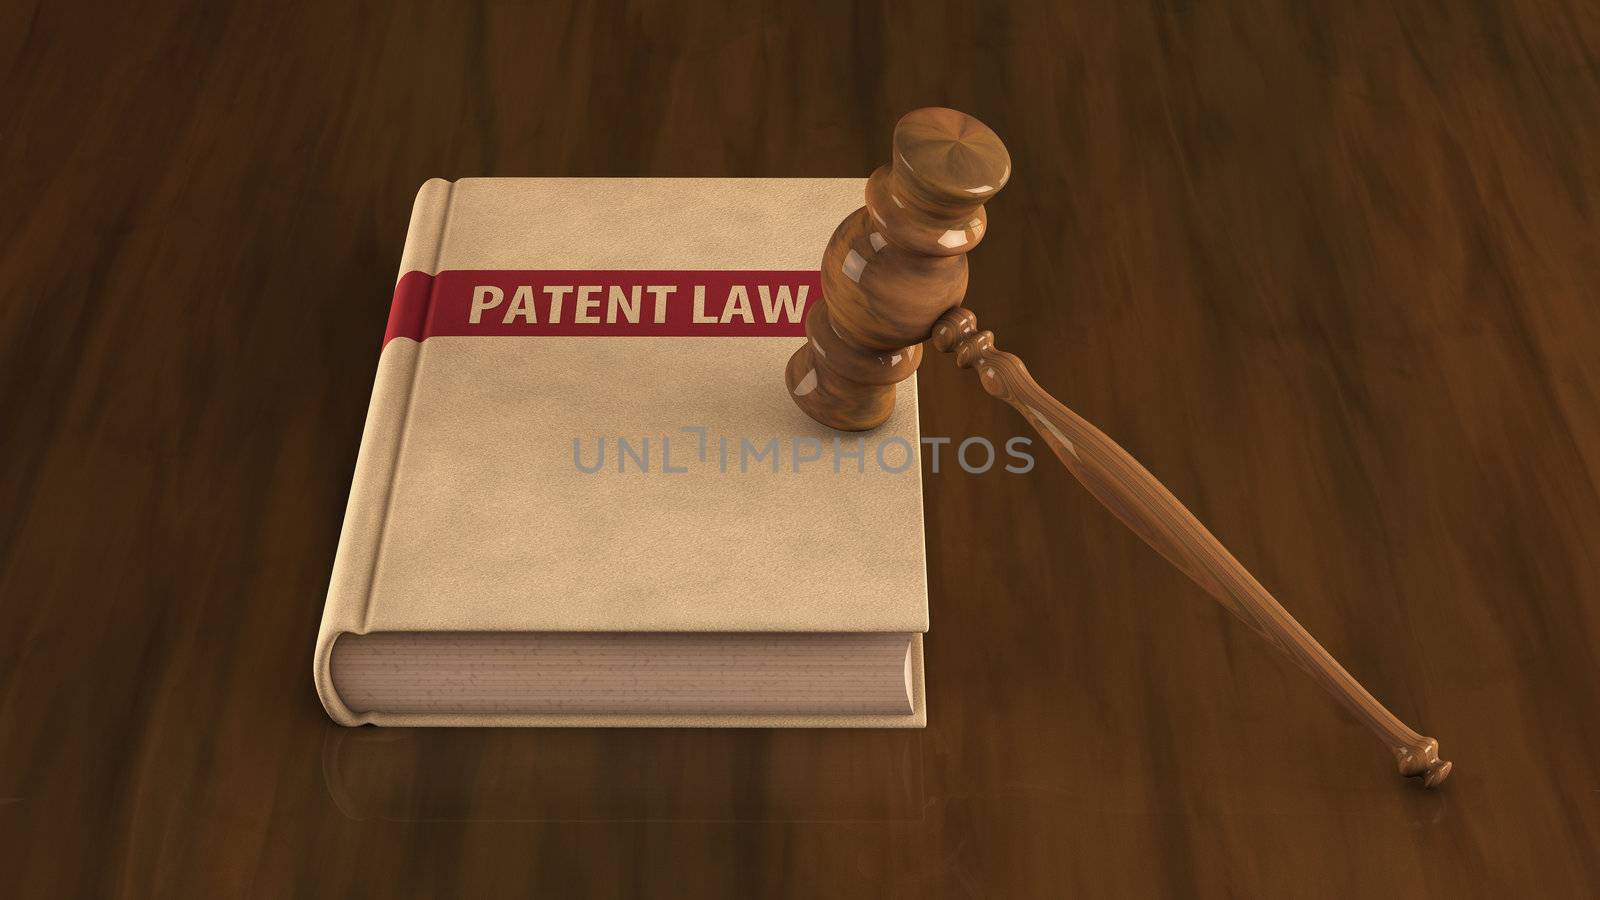 Patent law book with gavel on it. Concept illustration
